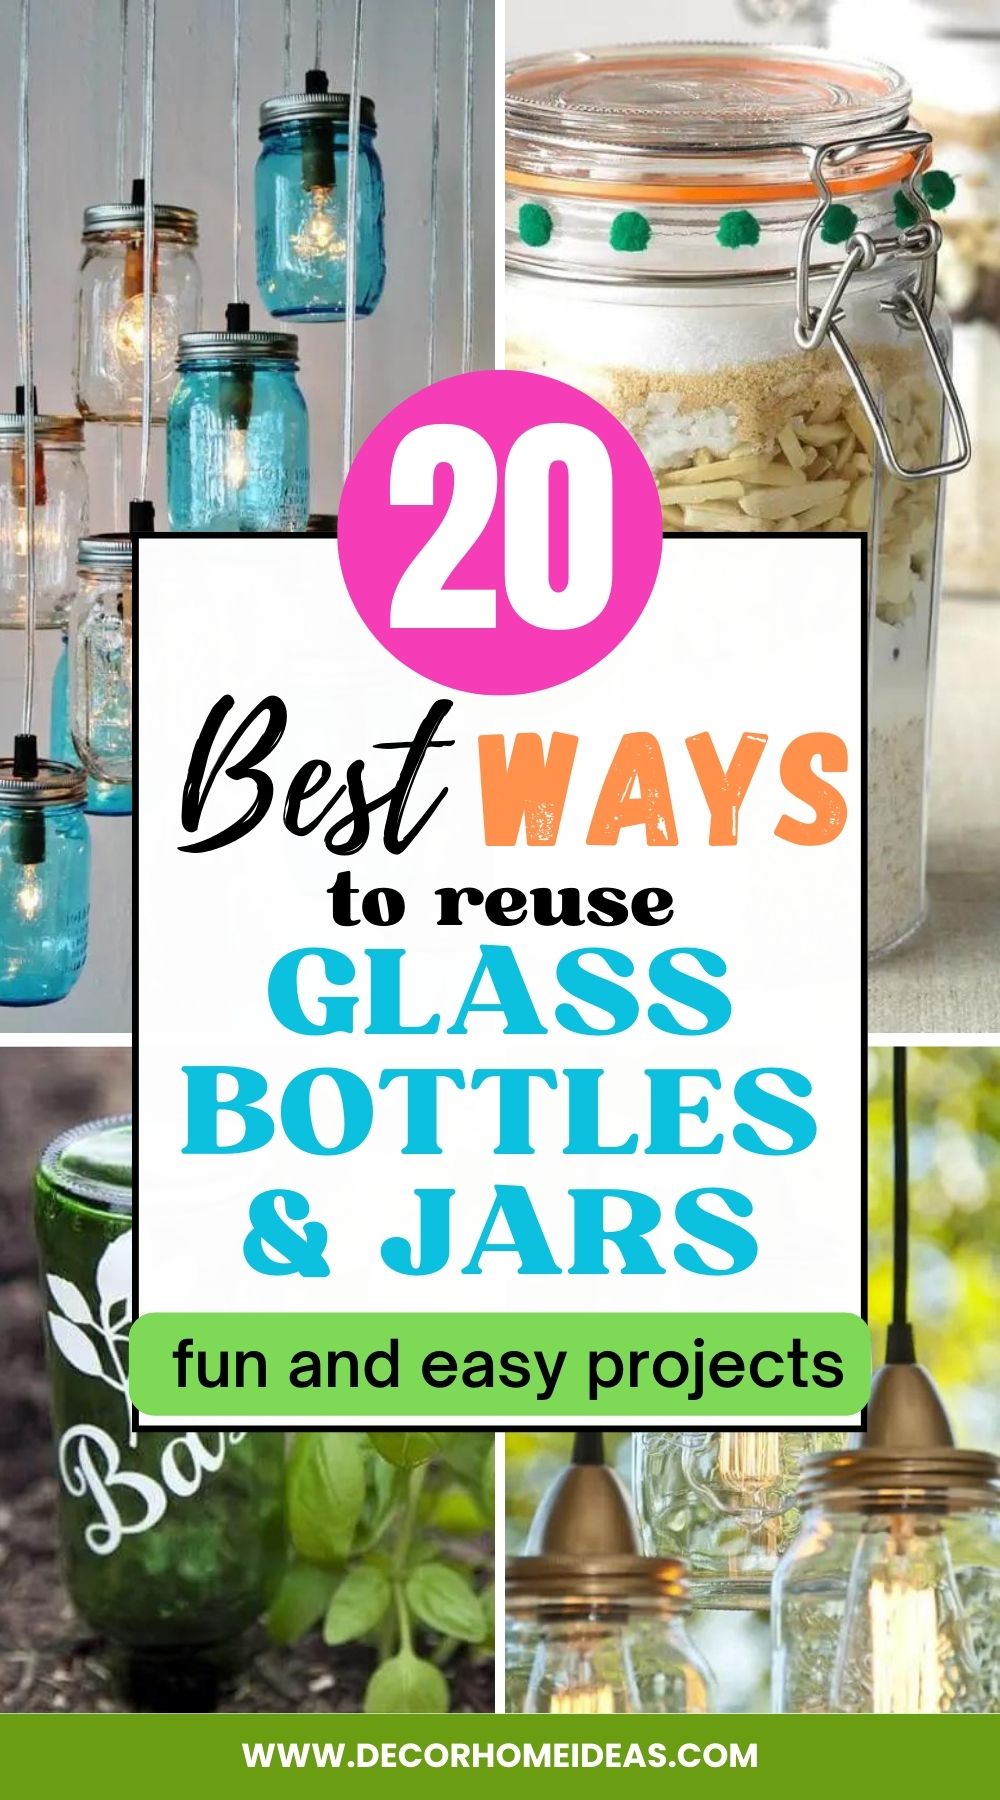 Learn 20 inspiring ways to reuse glass bottles and jars! From DIYs to crafts, find the perfect project for your next eco-friendly project.